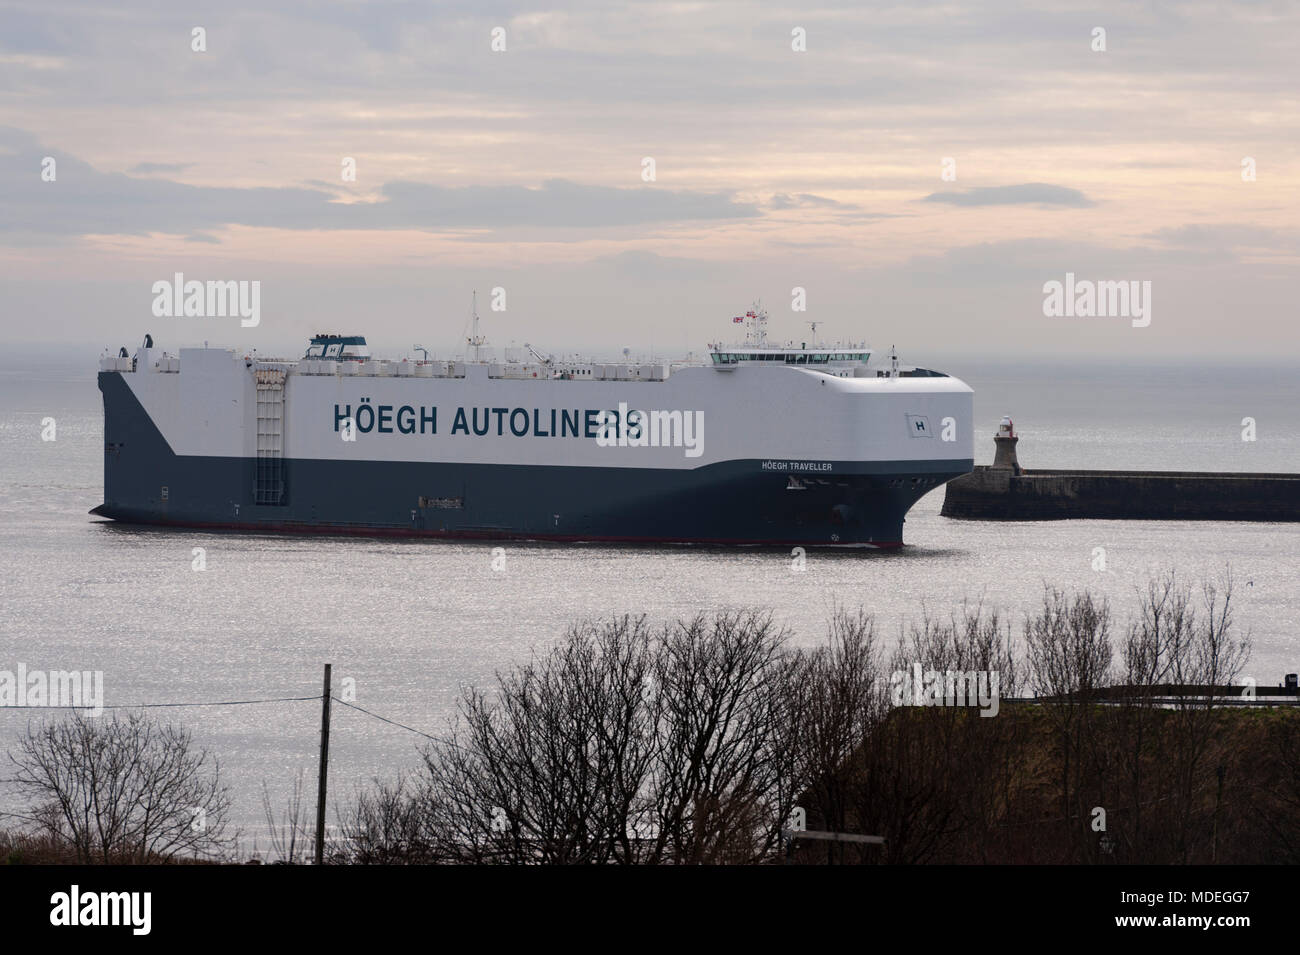 The Hoegh Traveller the autoliner arriving in the river Tyne on the early morning low tide, on the North East Coast. Stock Photo